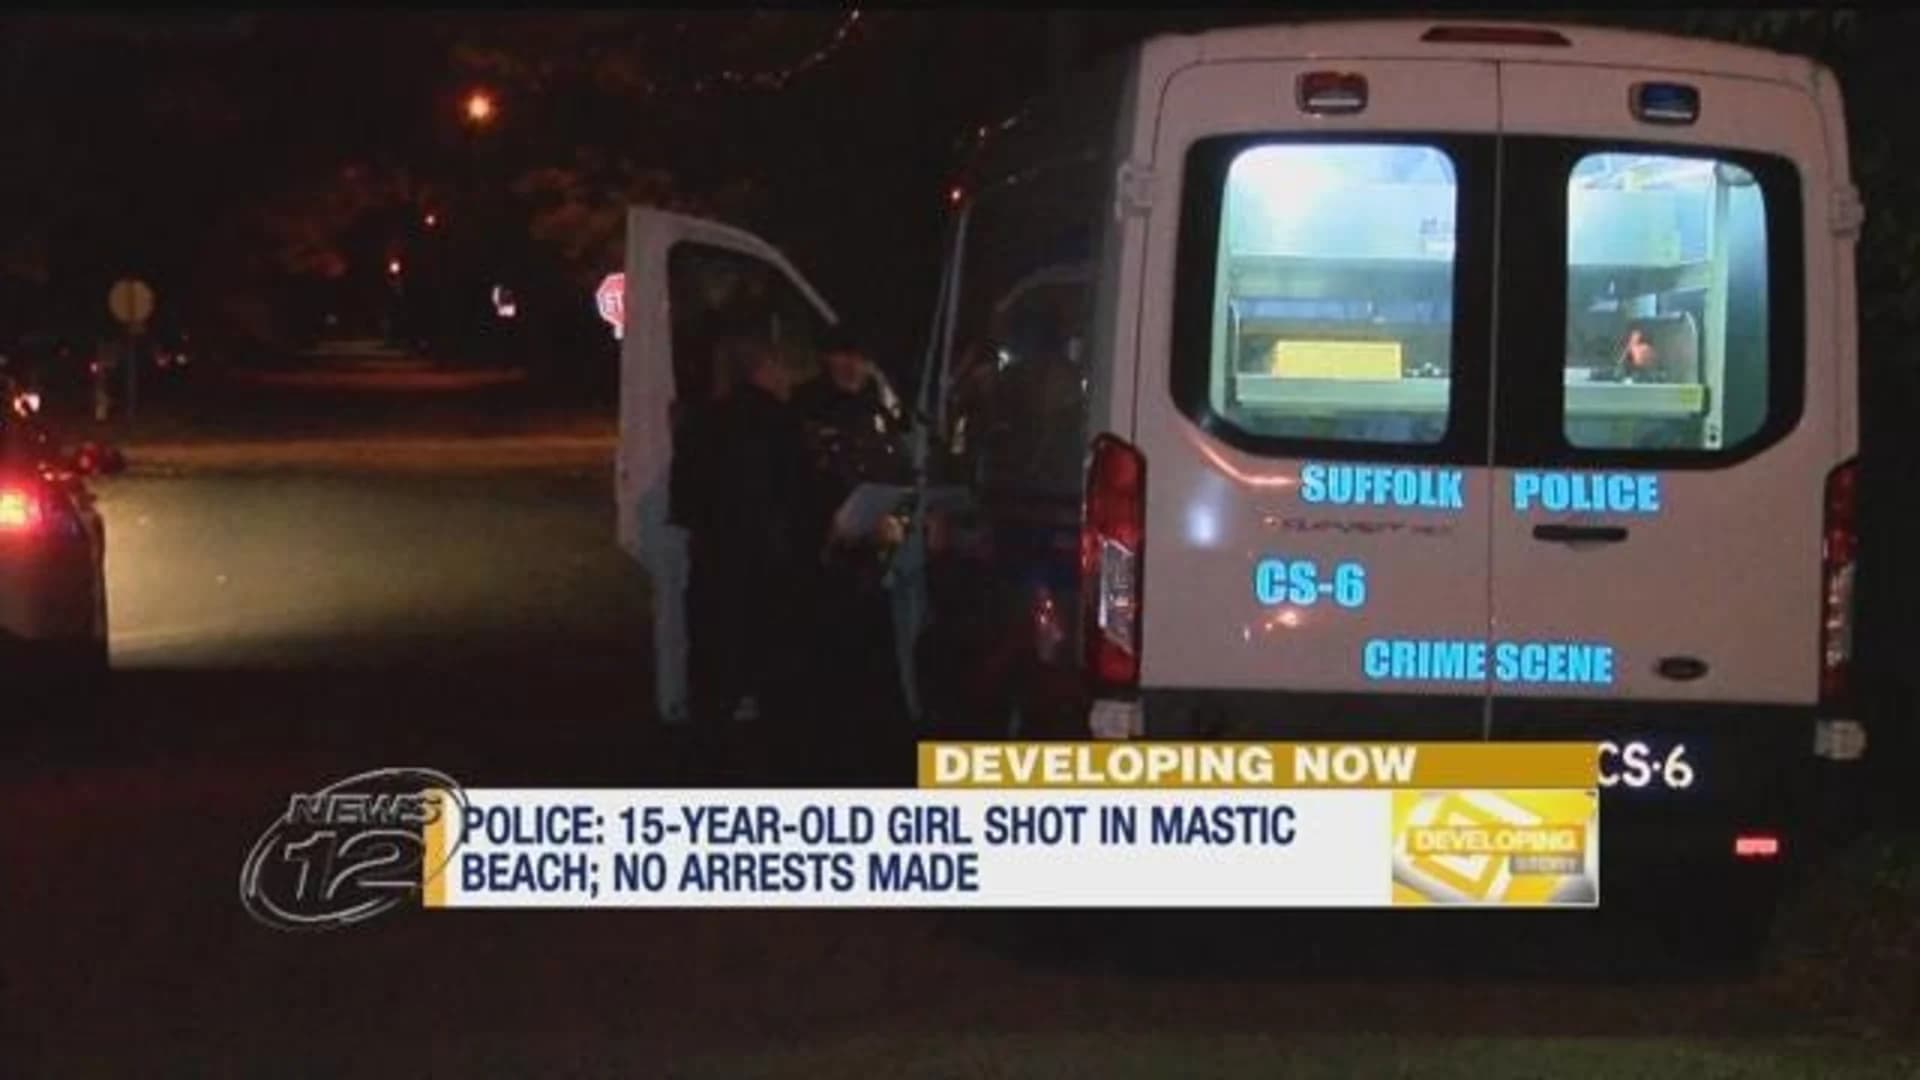 Police: Teen shot in Mastic Beach, no arrests made